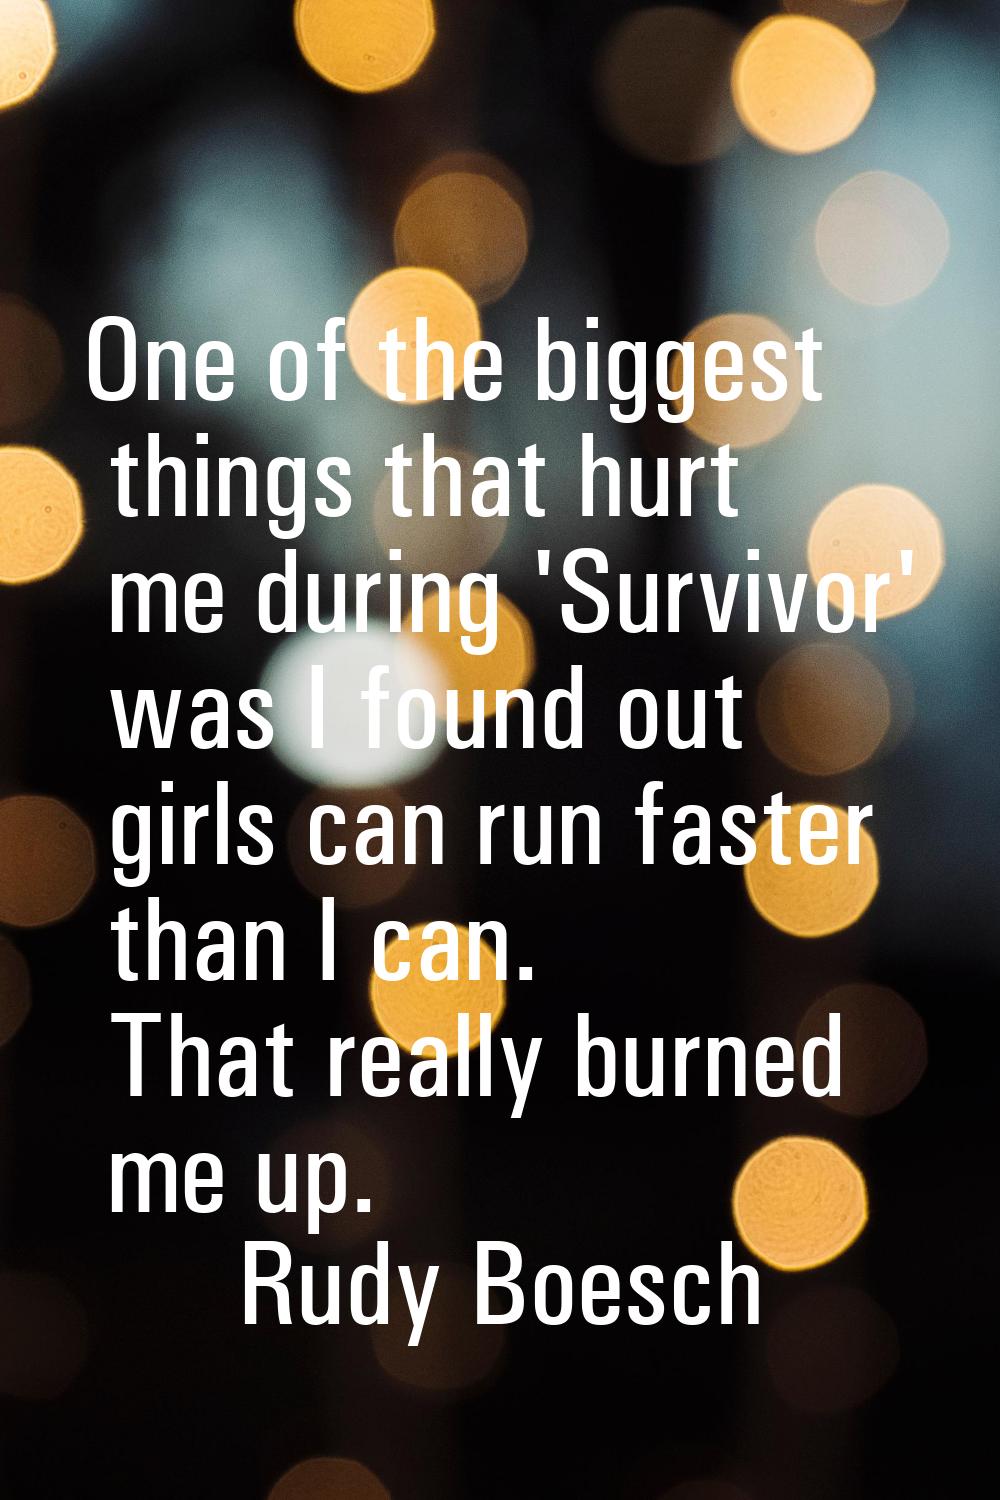 One of the biggest things that hurt me during 'Survivor' was I found out girls can run faster than 